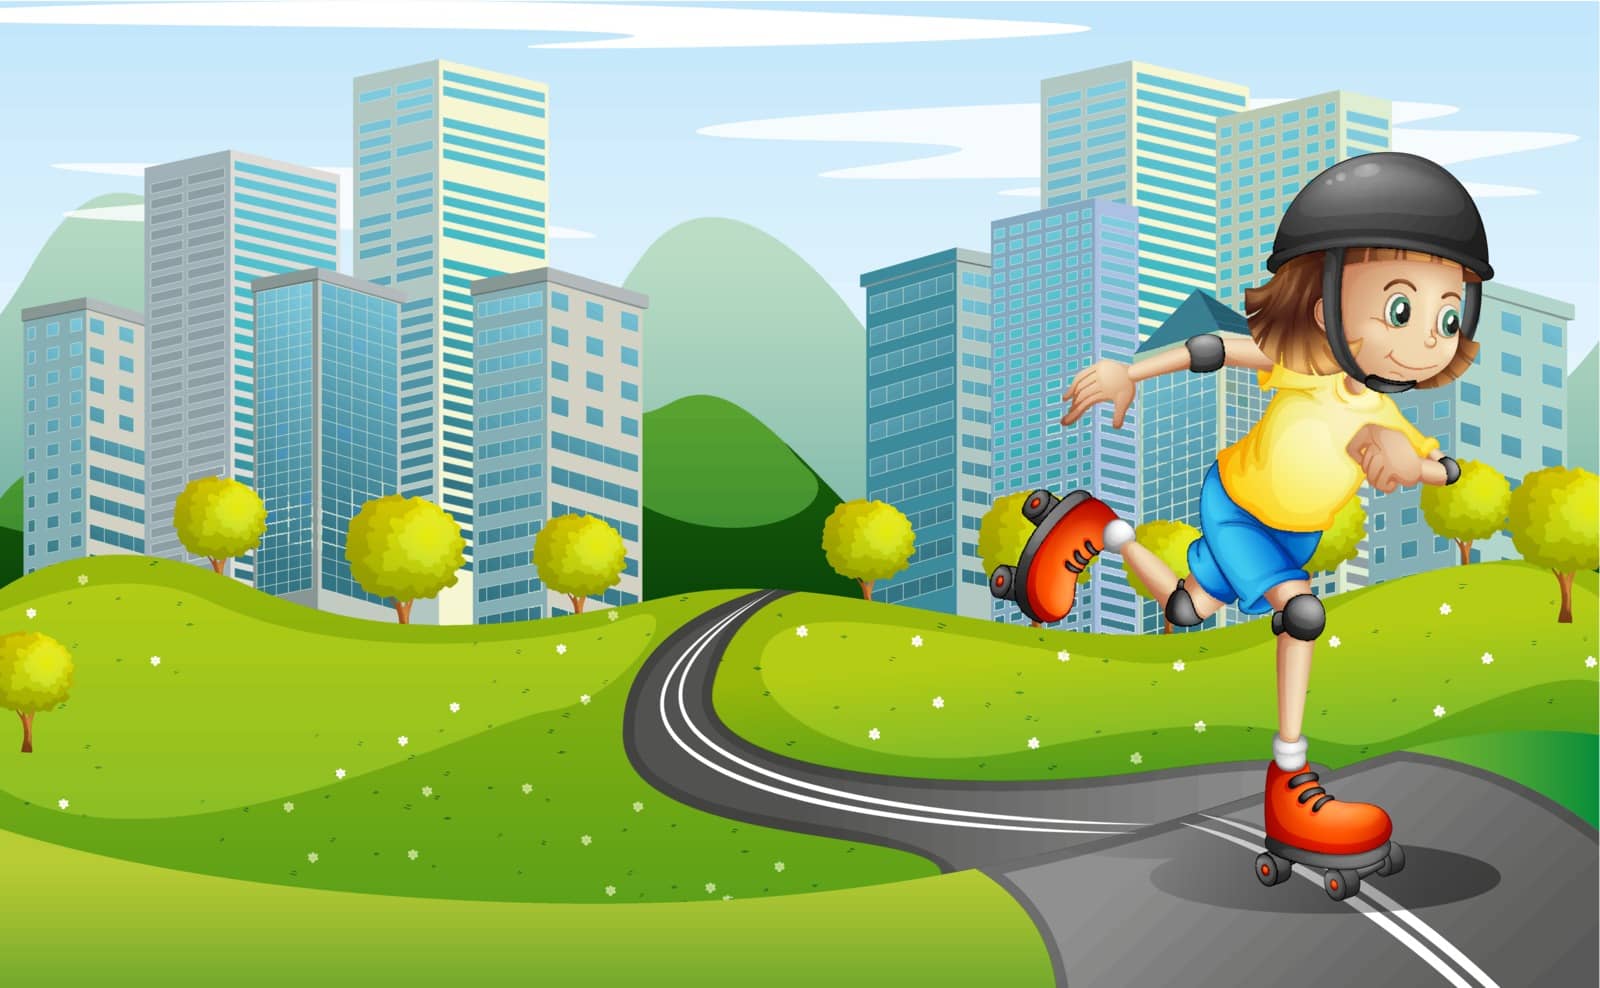 Illustration of a girl rollerskating at the road with a safety helmet